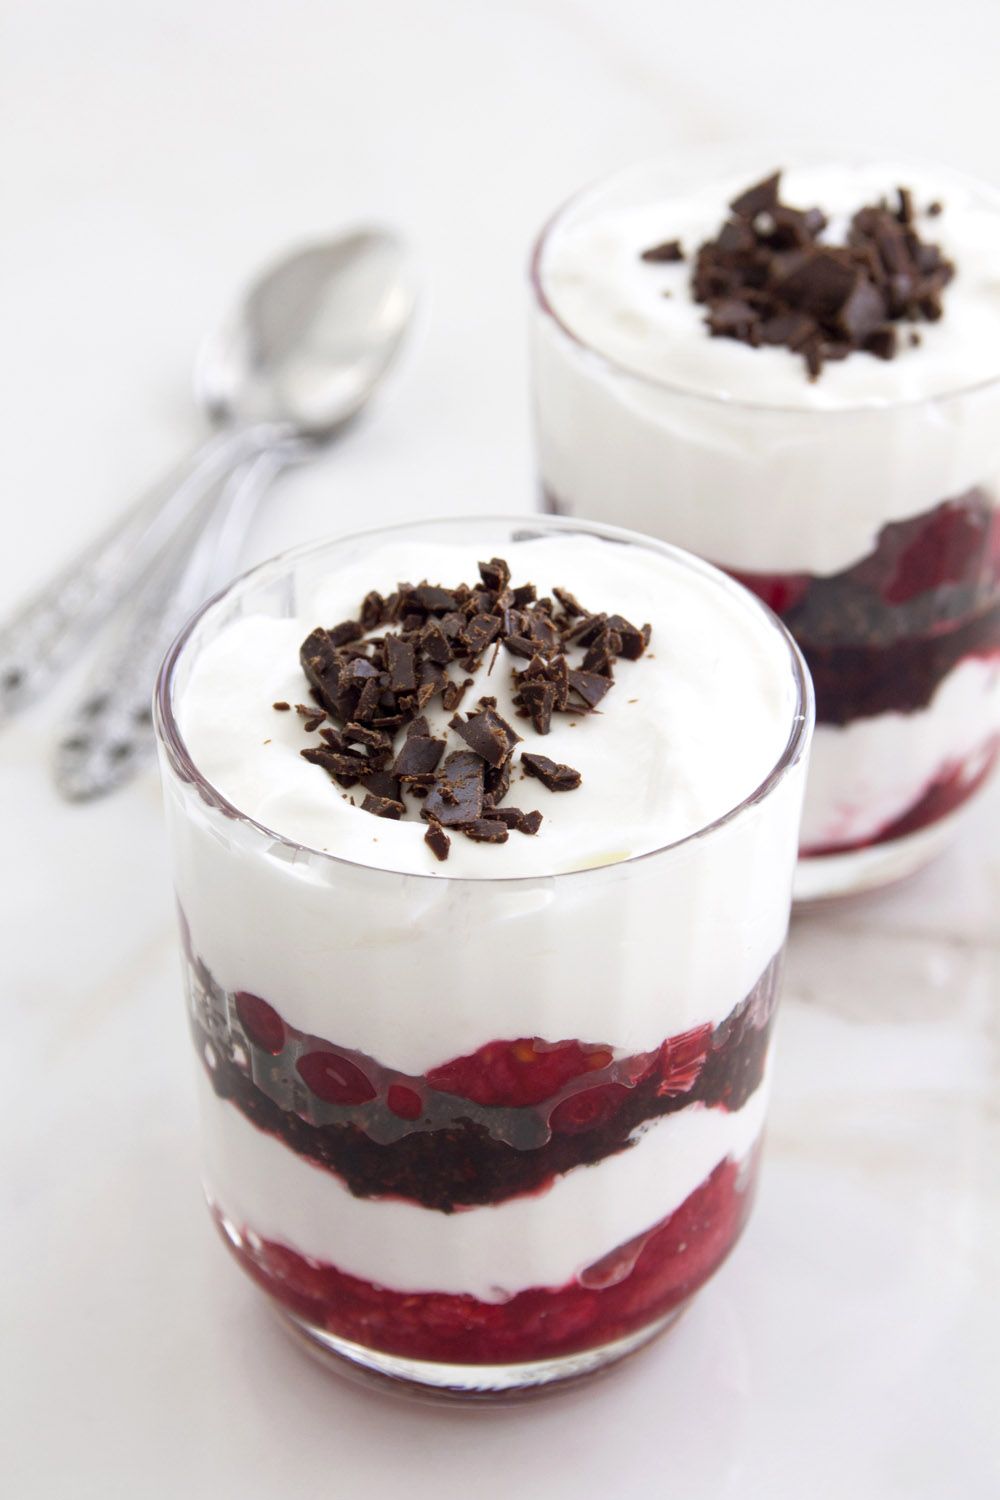 Vegan Chocolate Trifle with Coconut and Berries